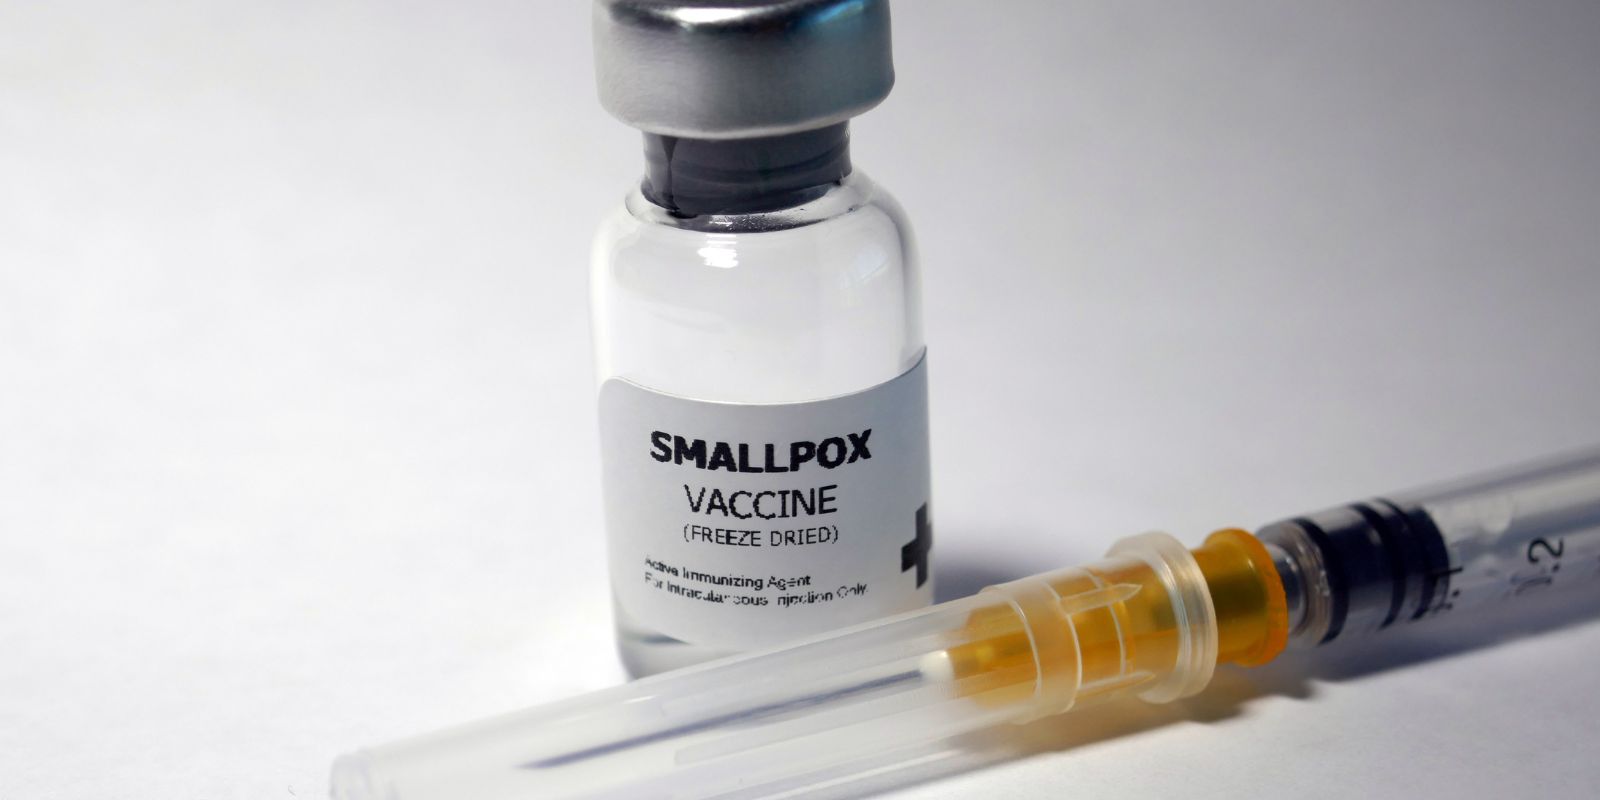 December 9th: Smallpox Officially Declared As Eradicated